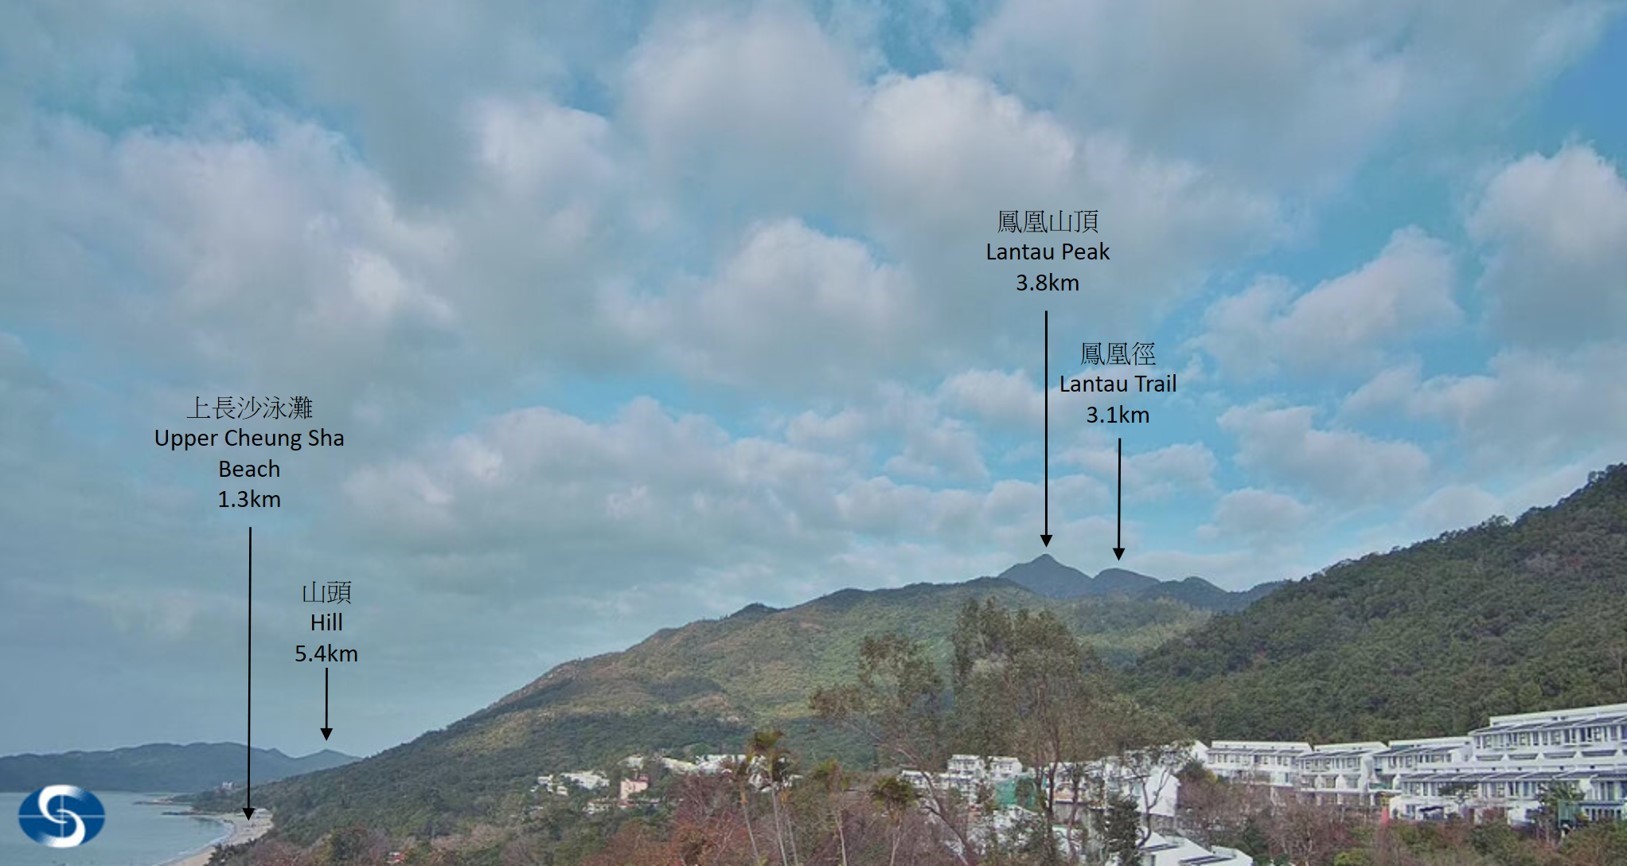 The Observatory website adds Real-Time Cheung Sha Weather Photos